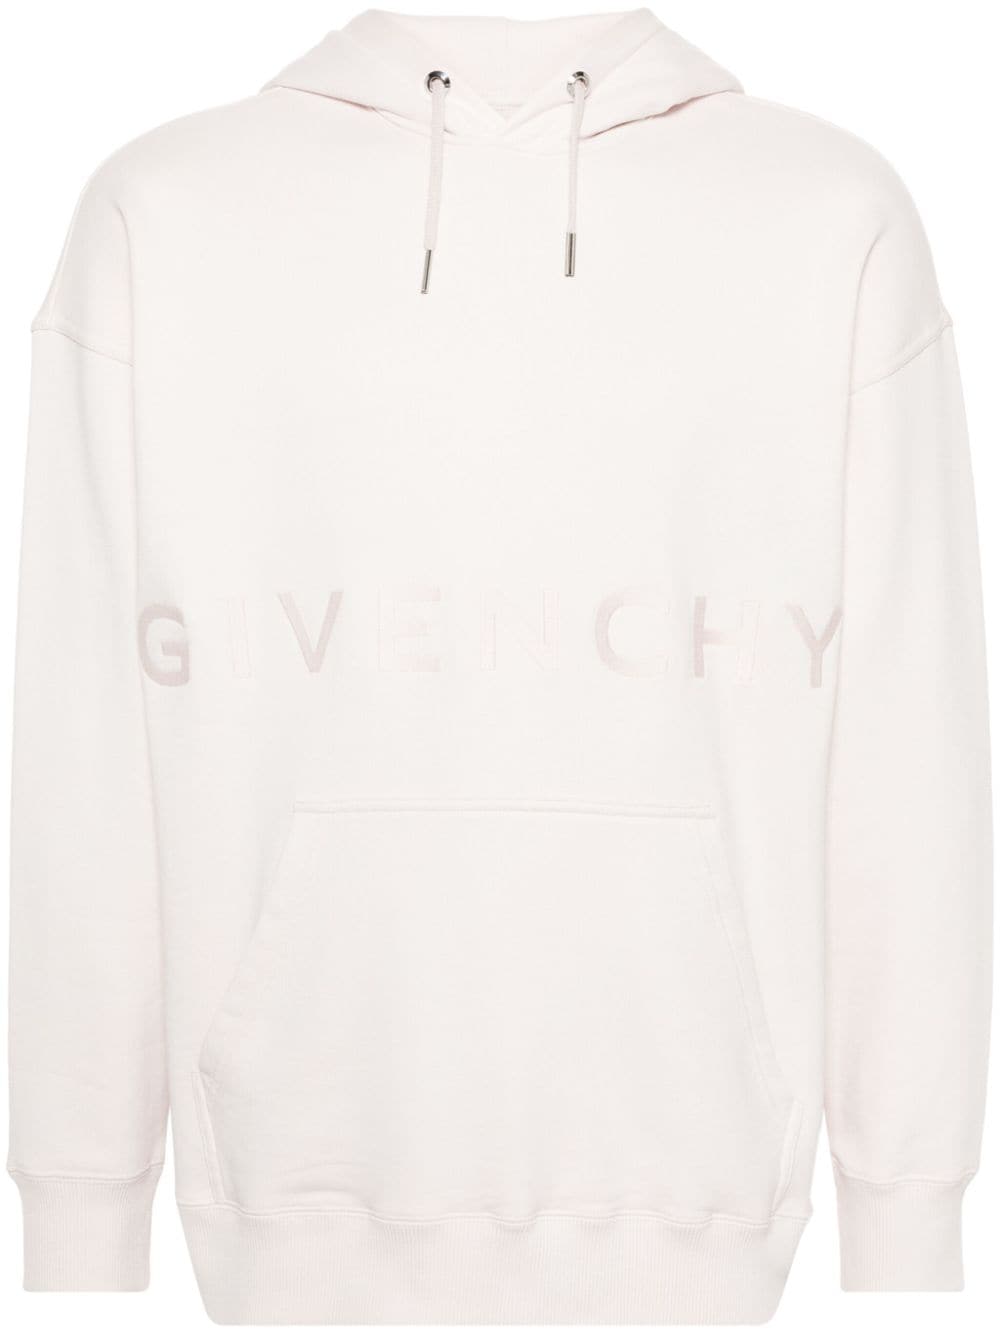 Givenchy logo-print cotton hoodie - Pink von Givenchy